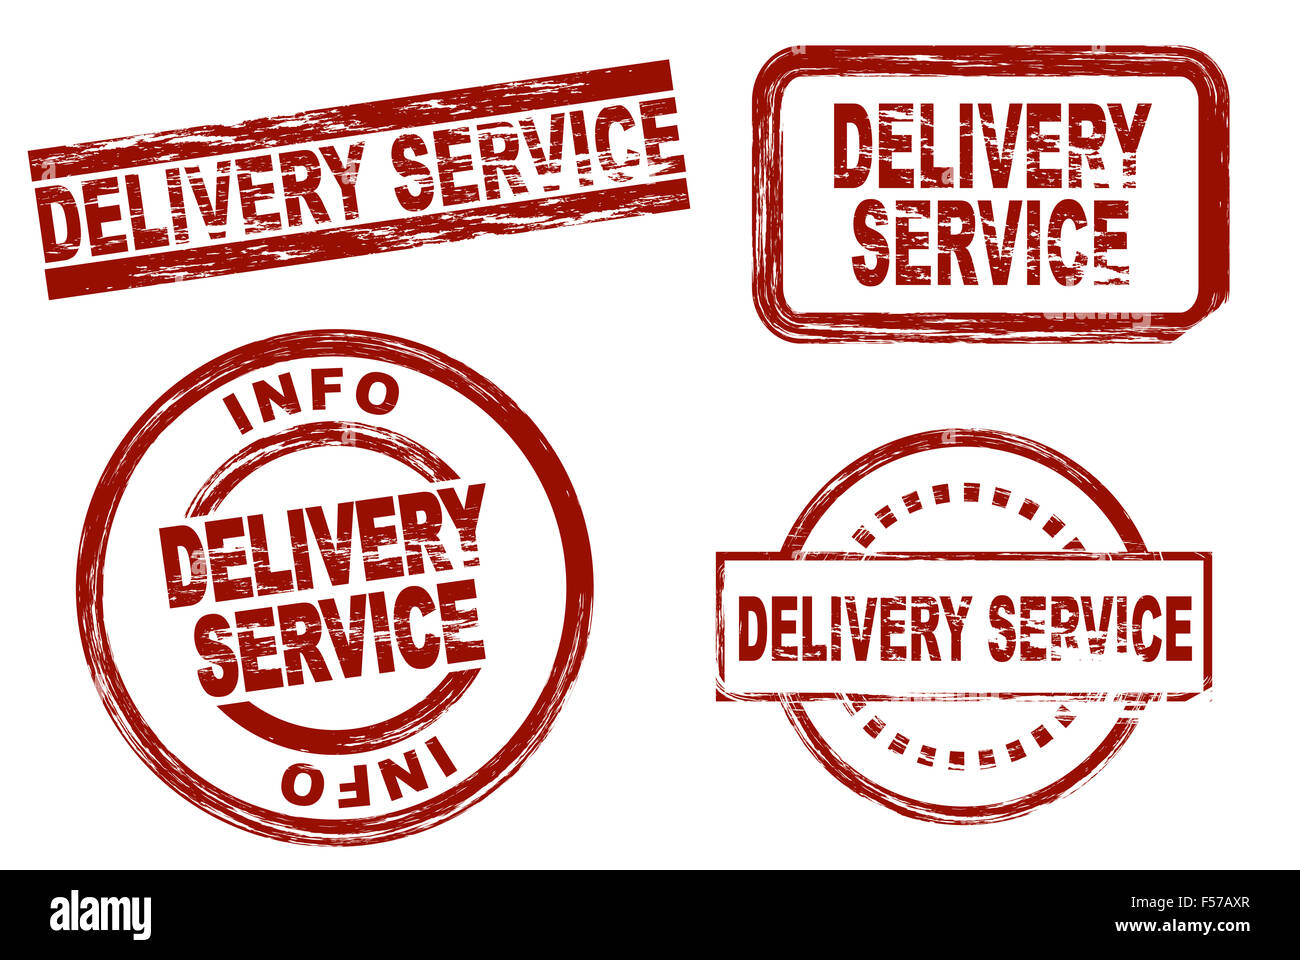 Set of stylized stamps showing the term delivery service. All on white background. Stock Photo